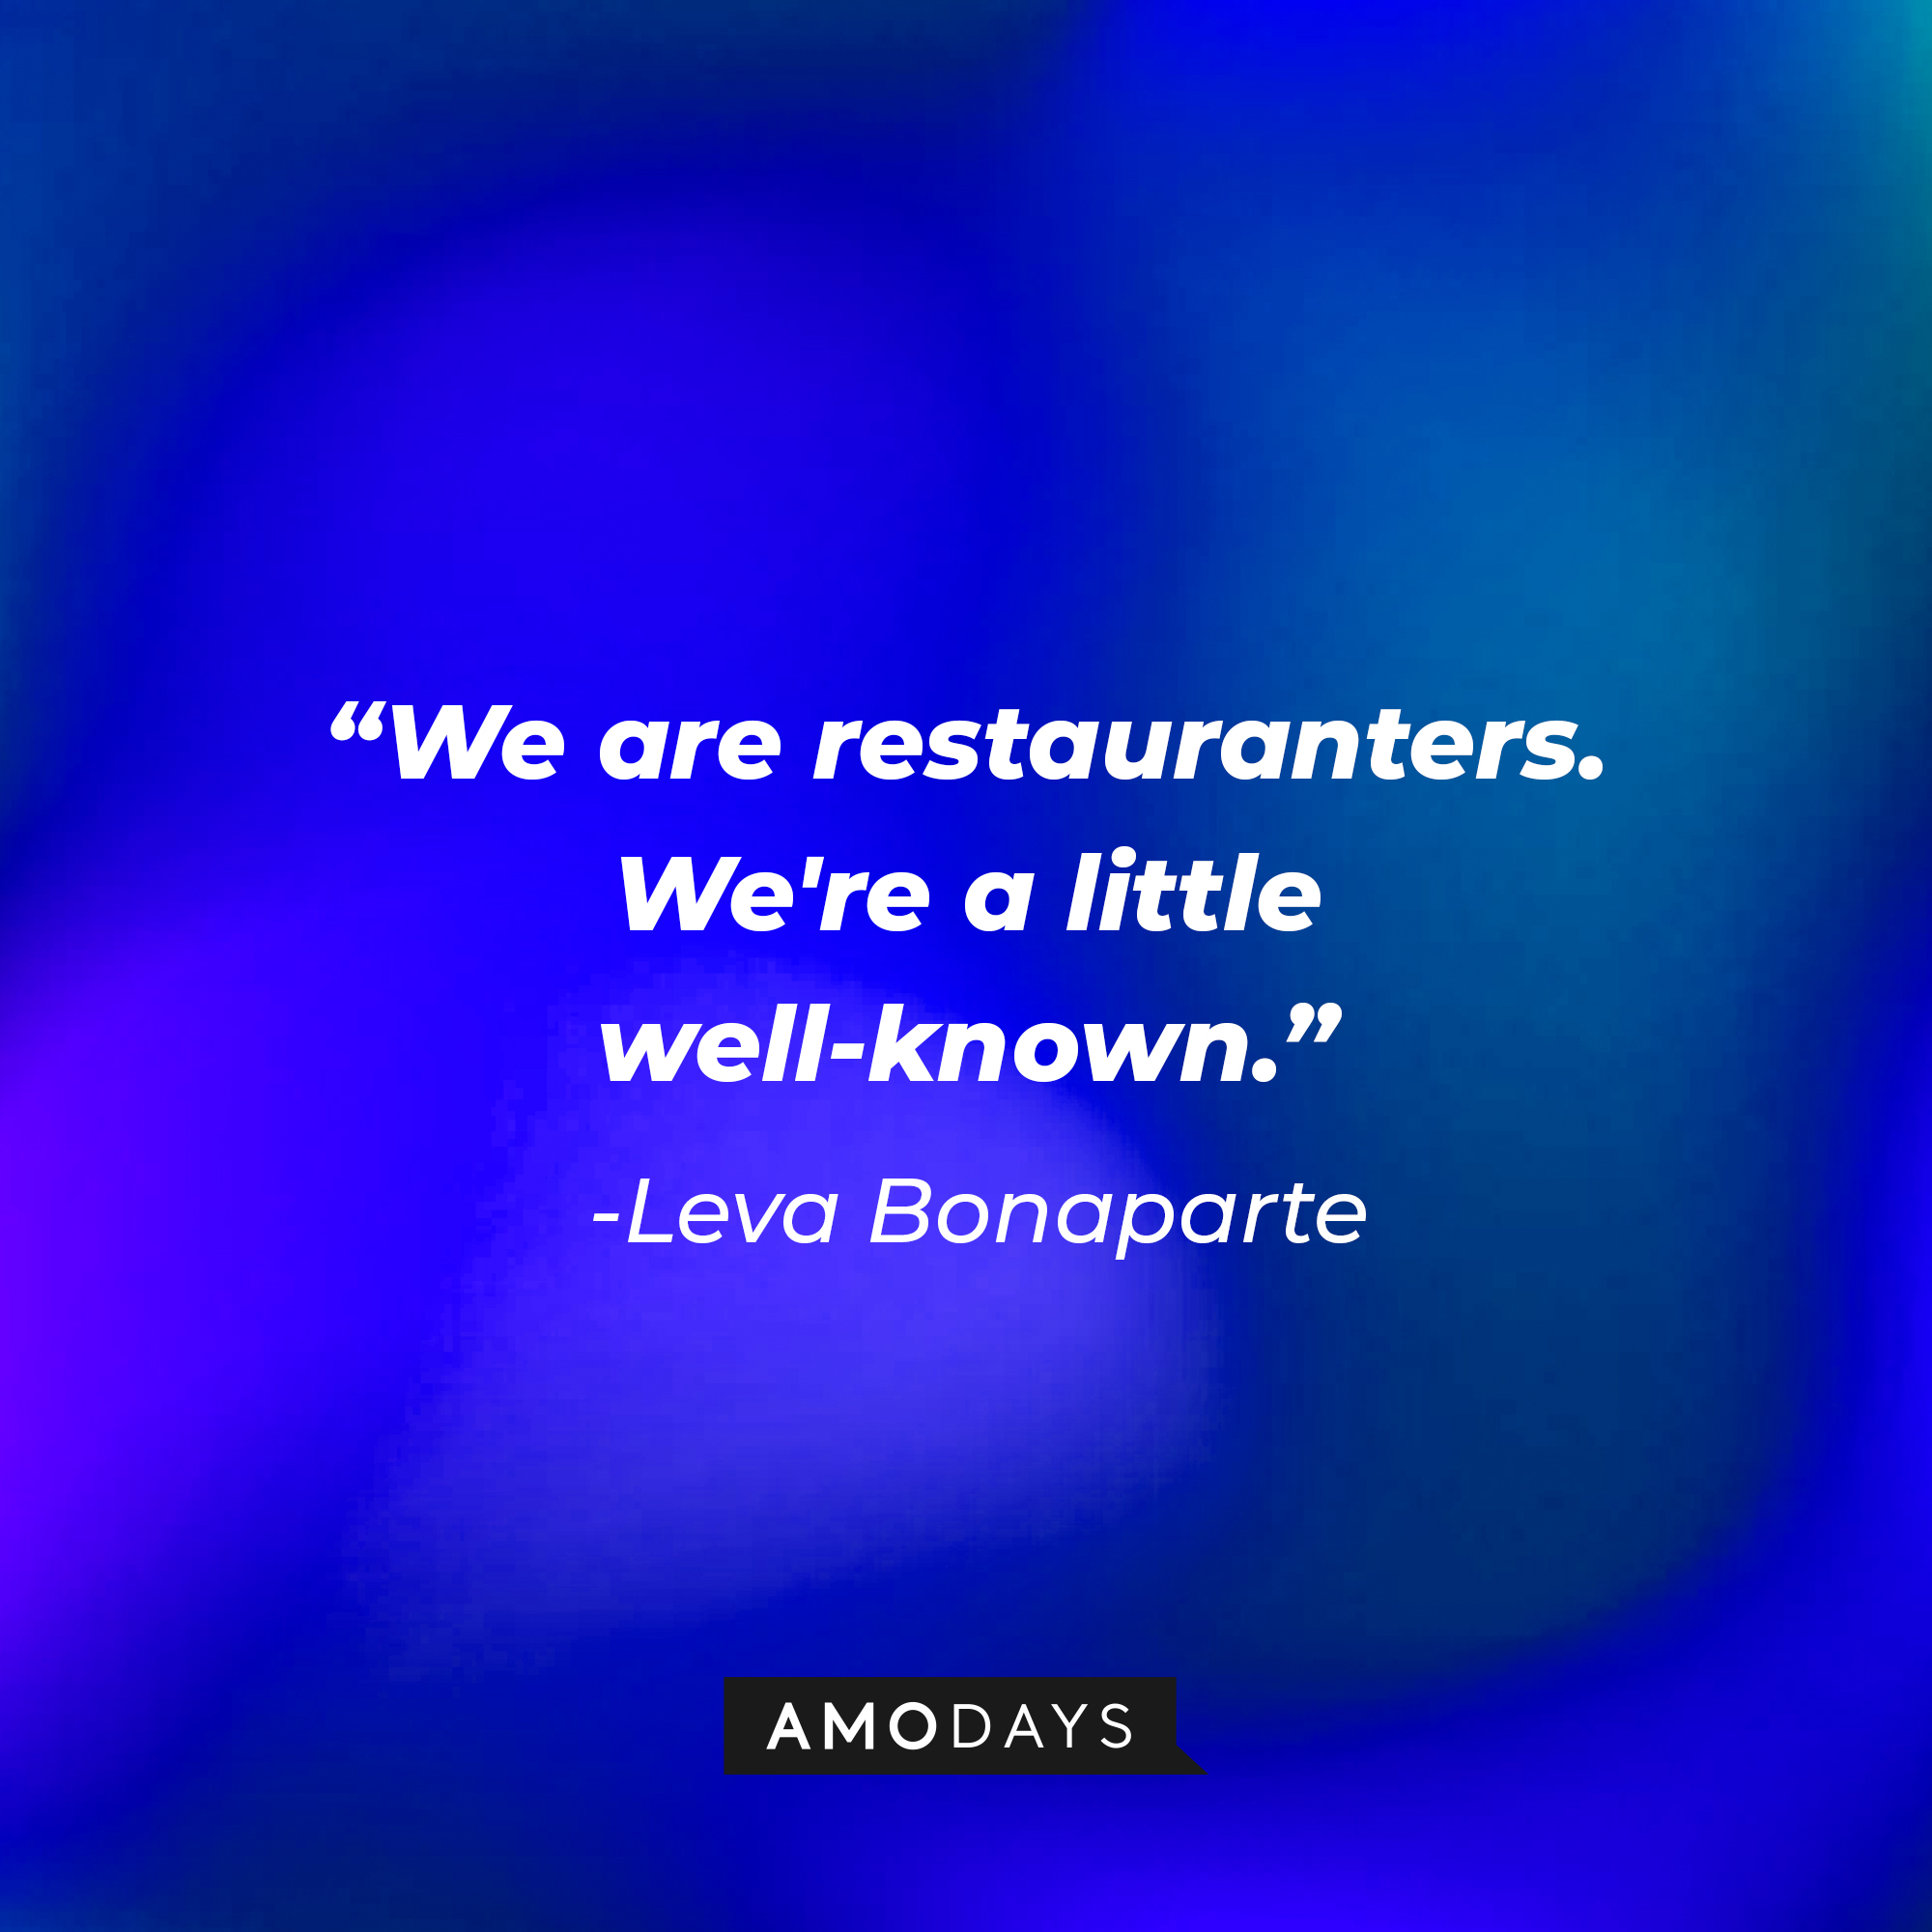 Leva Bonaparte's quote: "We are restauranters. We're a little well-known." | Source: AmoDays